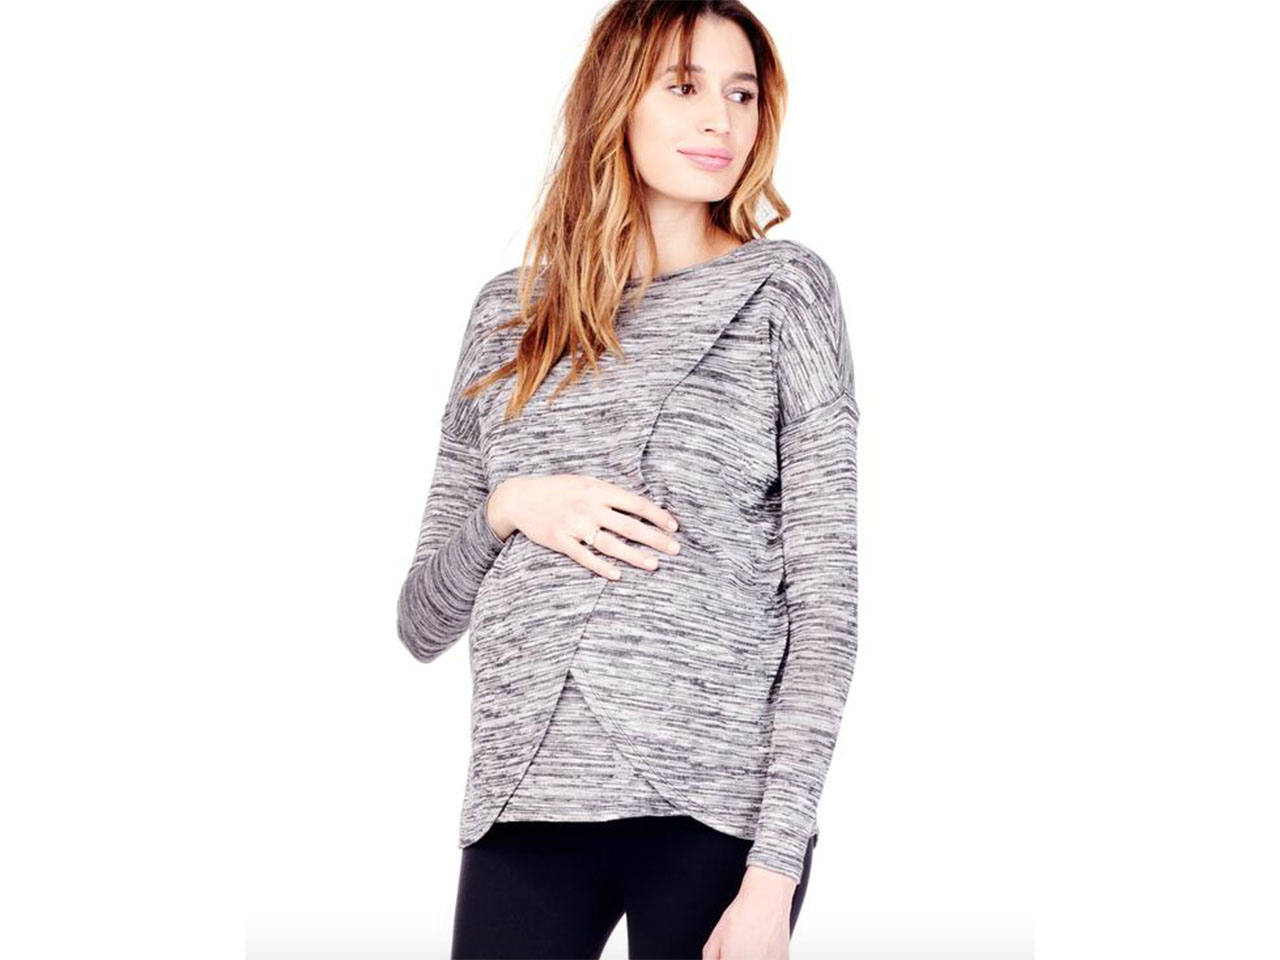 A pregnant woman wearing a workout maternity sweater